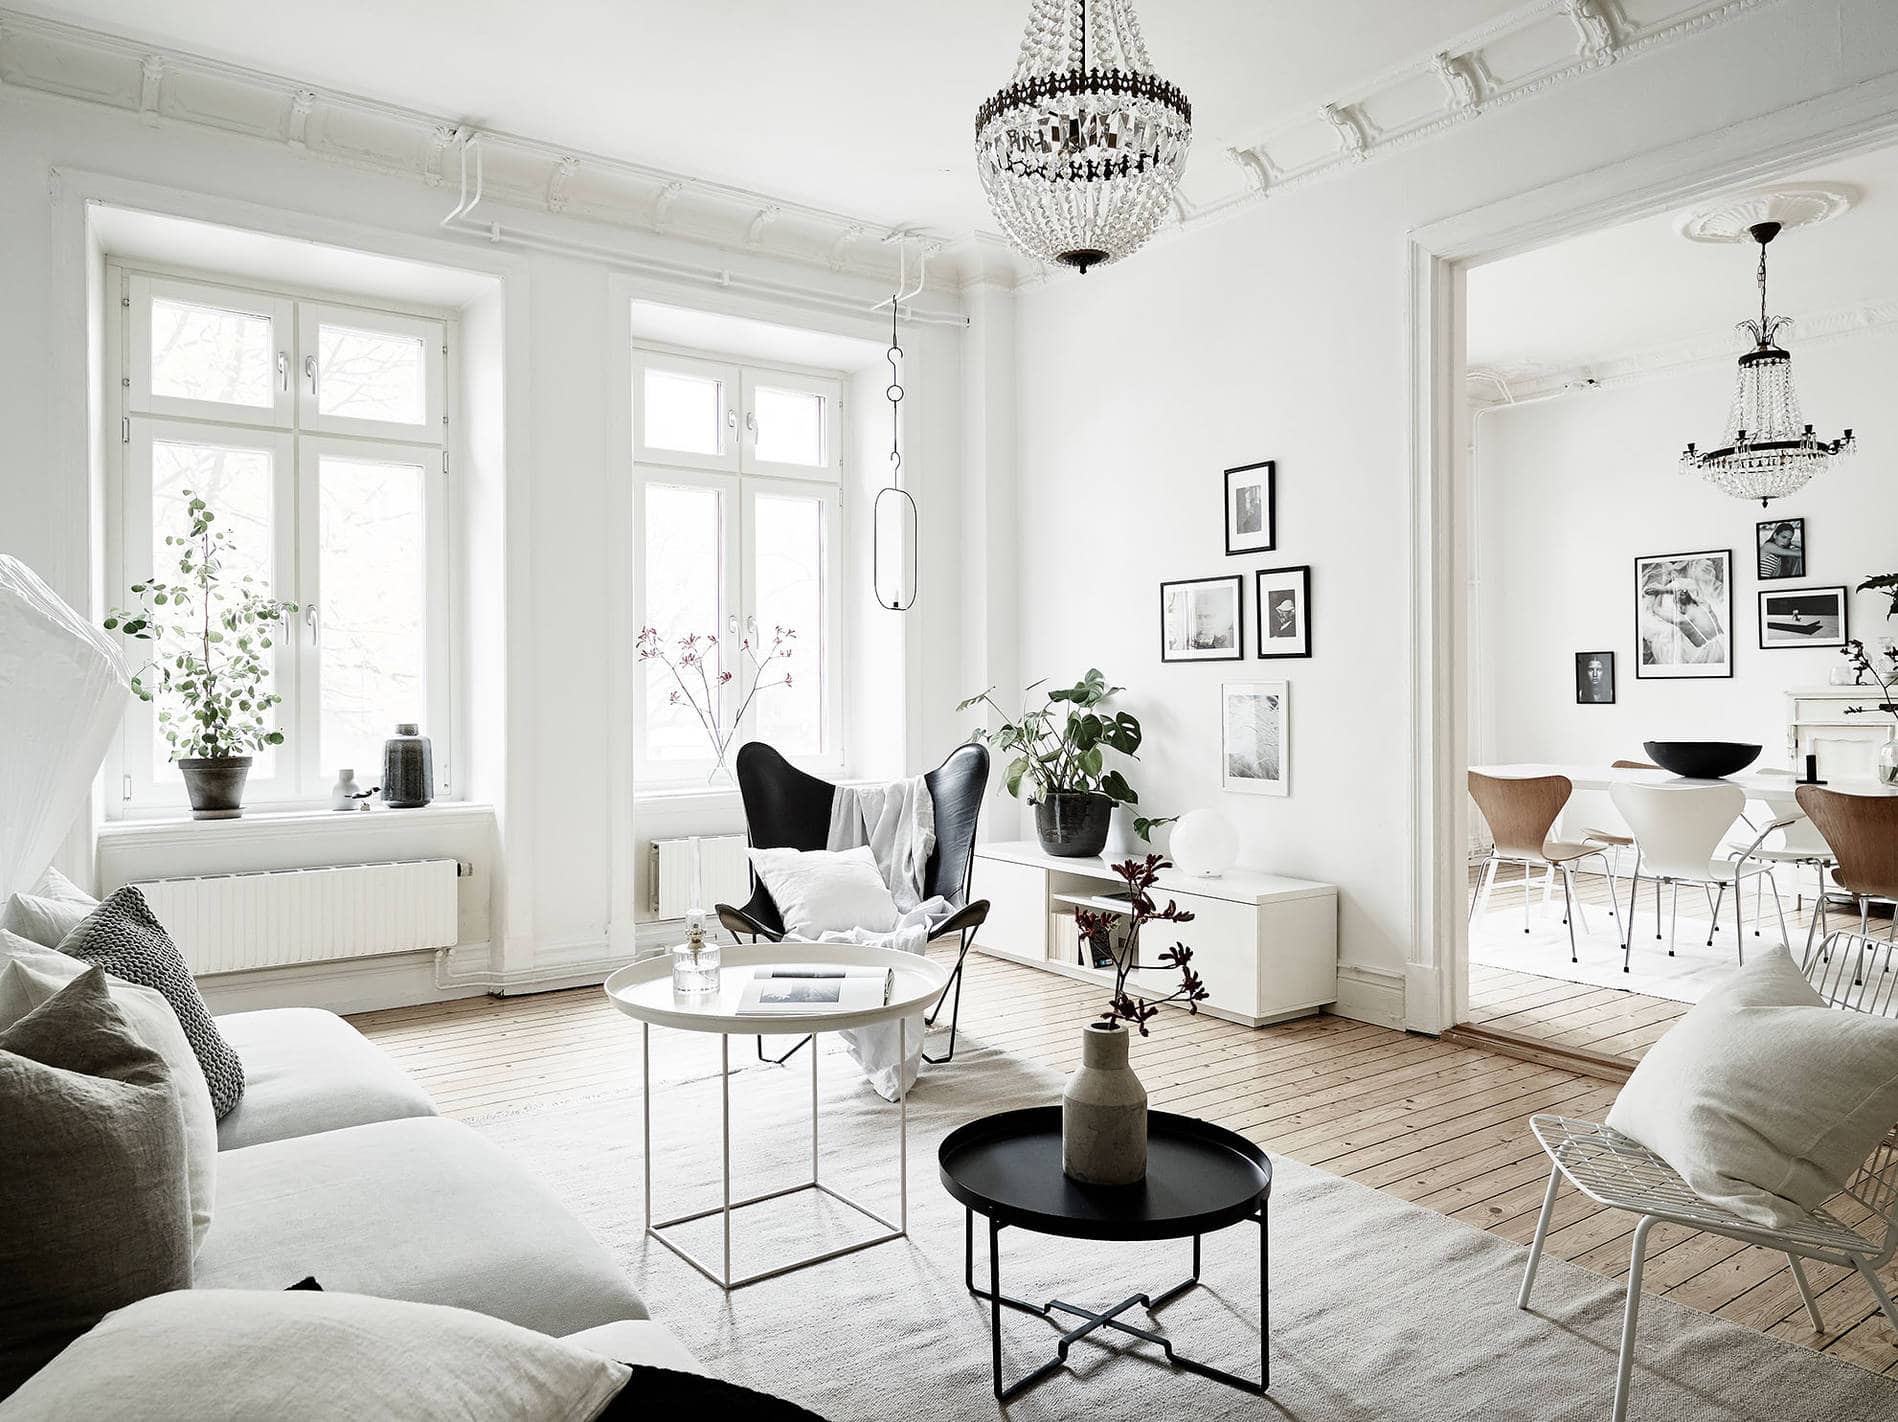 23 white couch living room ideas for a bright look - COCO LAPINE DESIGNCOCO  LAPINE DESIGN